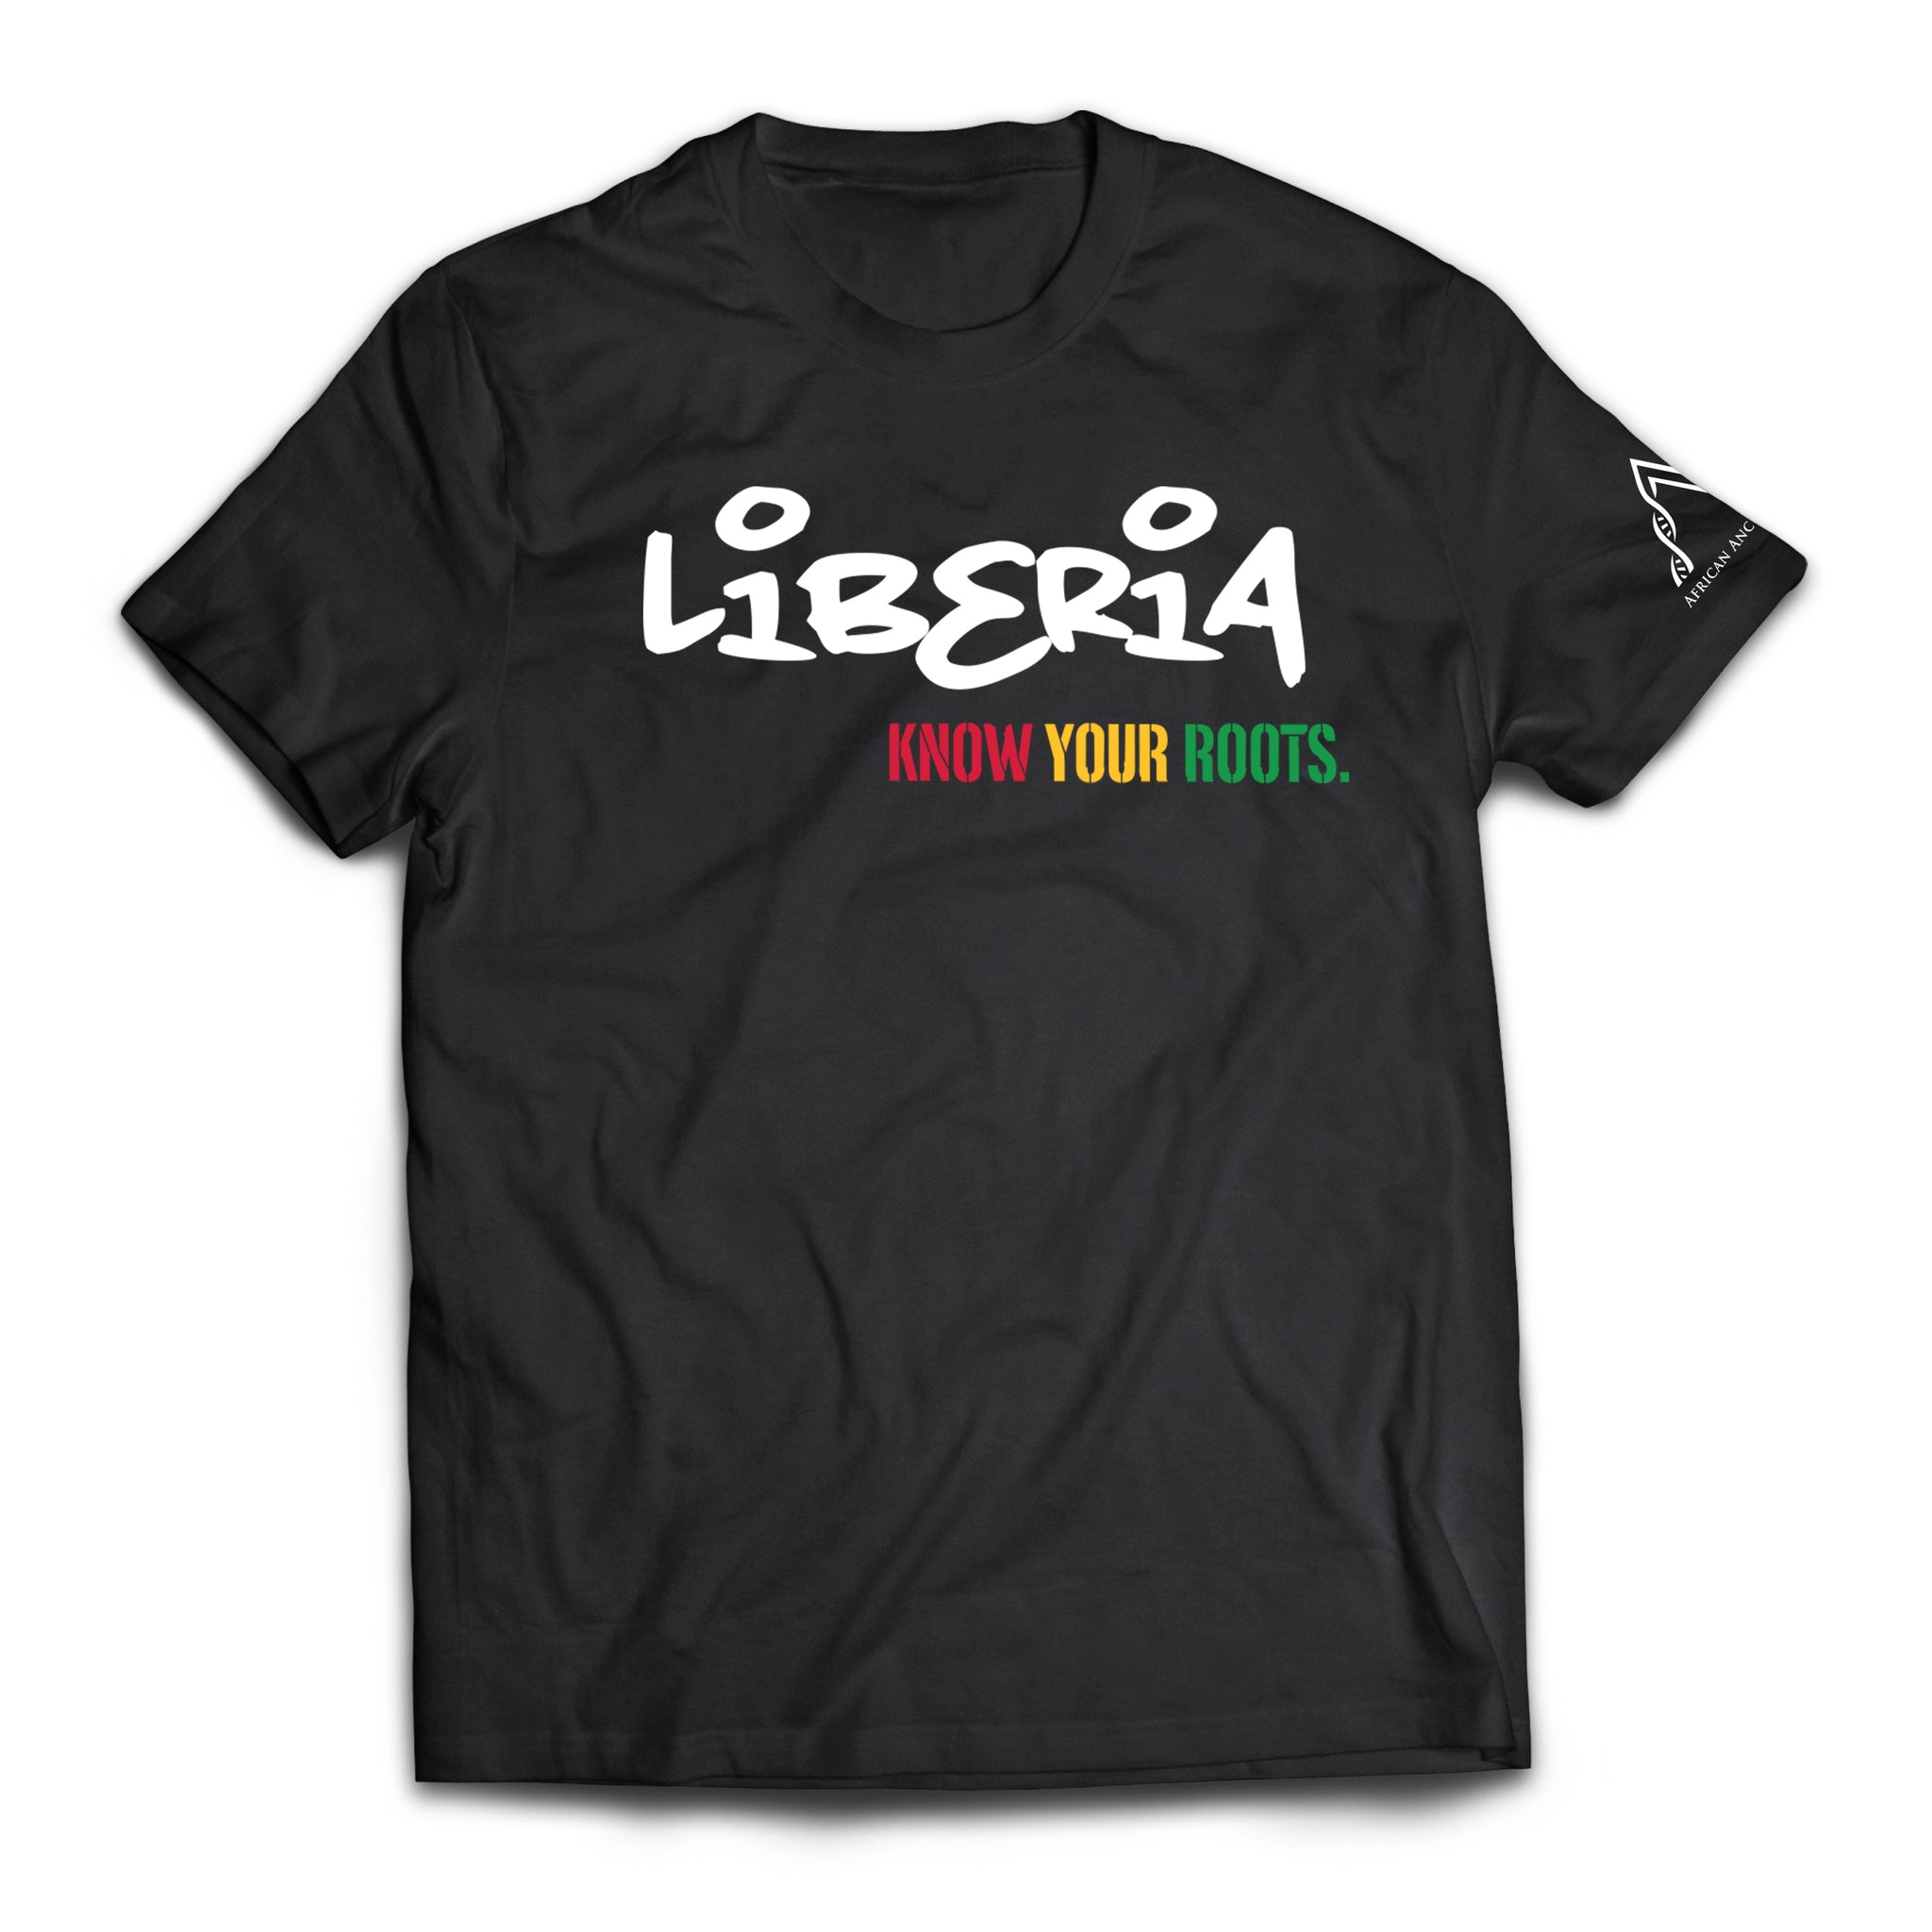 African Ancestry Liberia T-Shirt with "Know Your Roots" written in African colors"